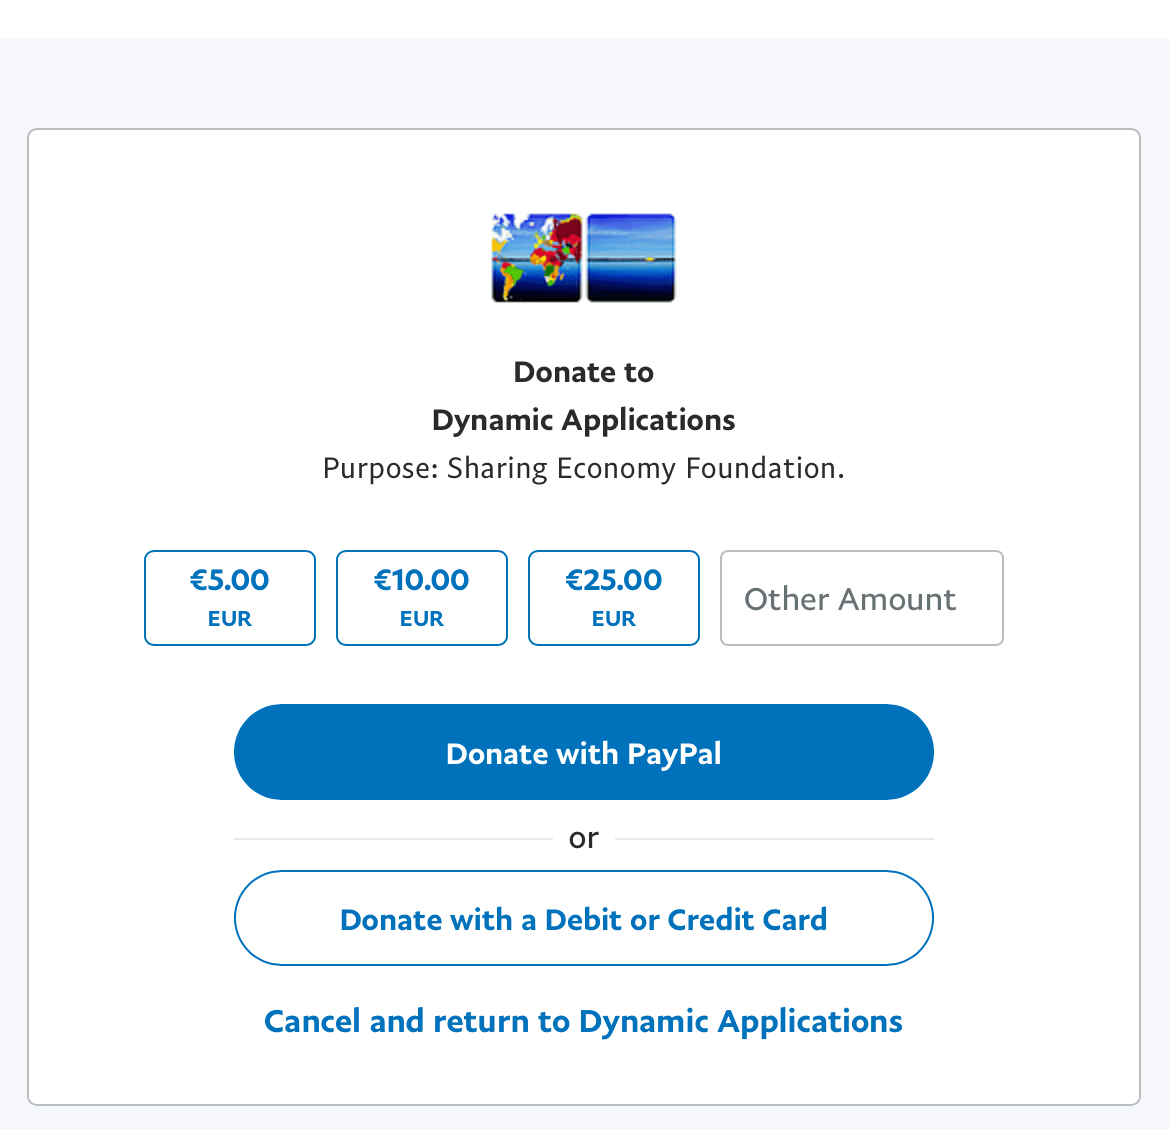 Donate to Dynamic Applications